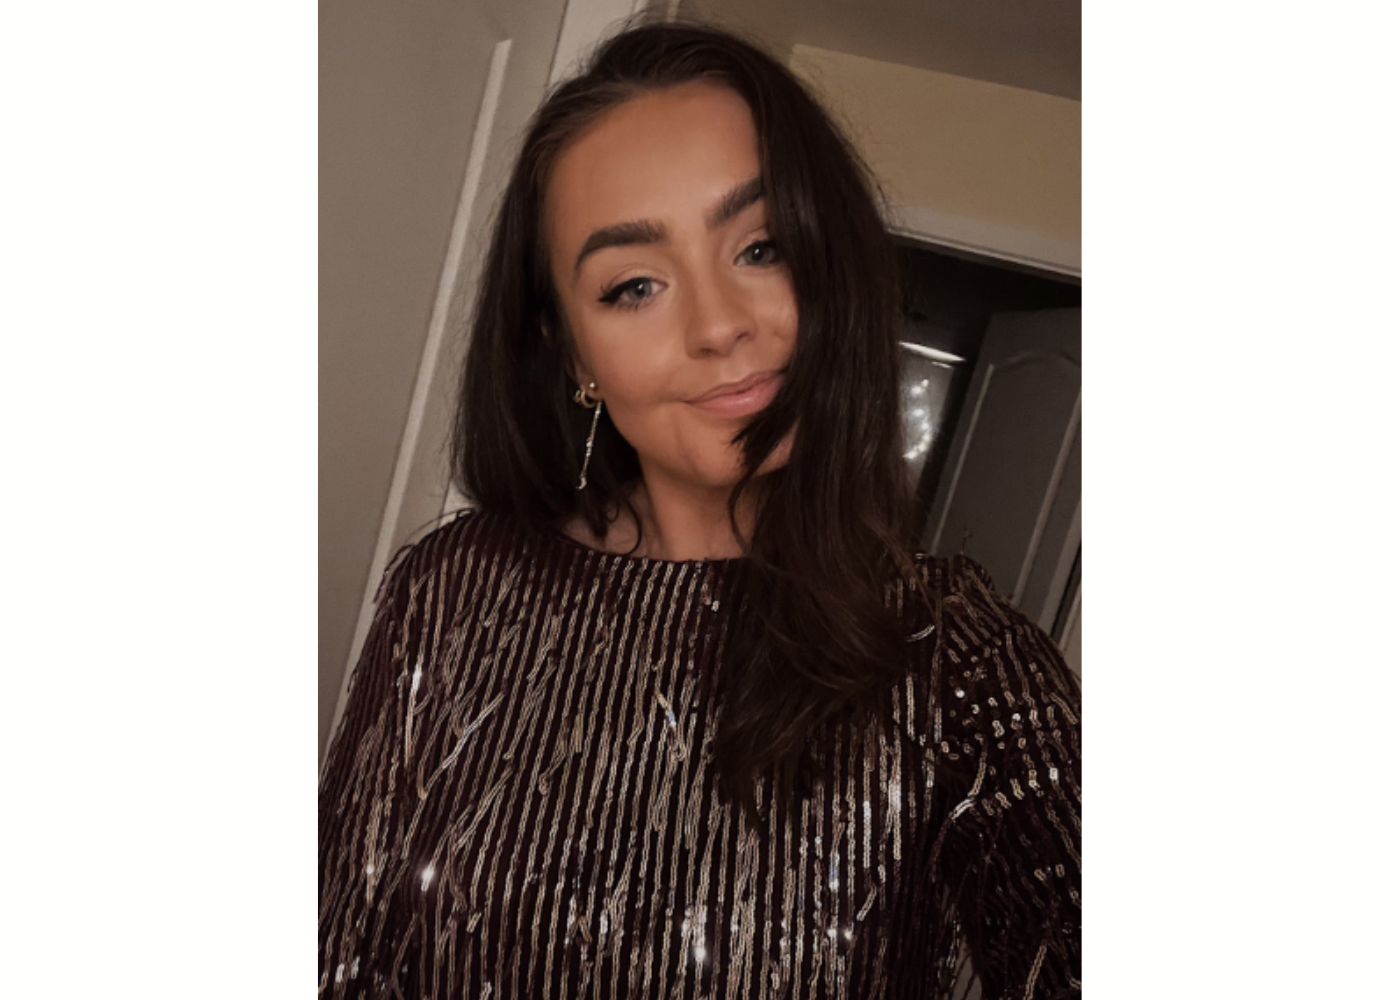 Chloe Linehan – From Arts Degree to Following Her Passion and Securing Her Dream Career at Primark